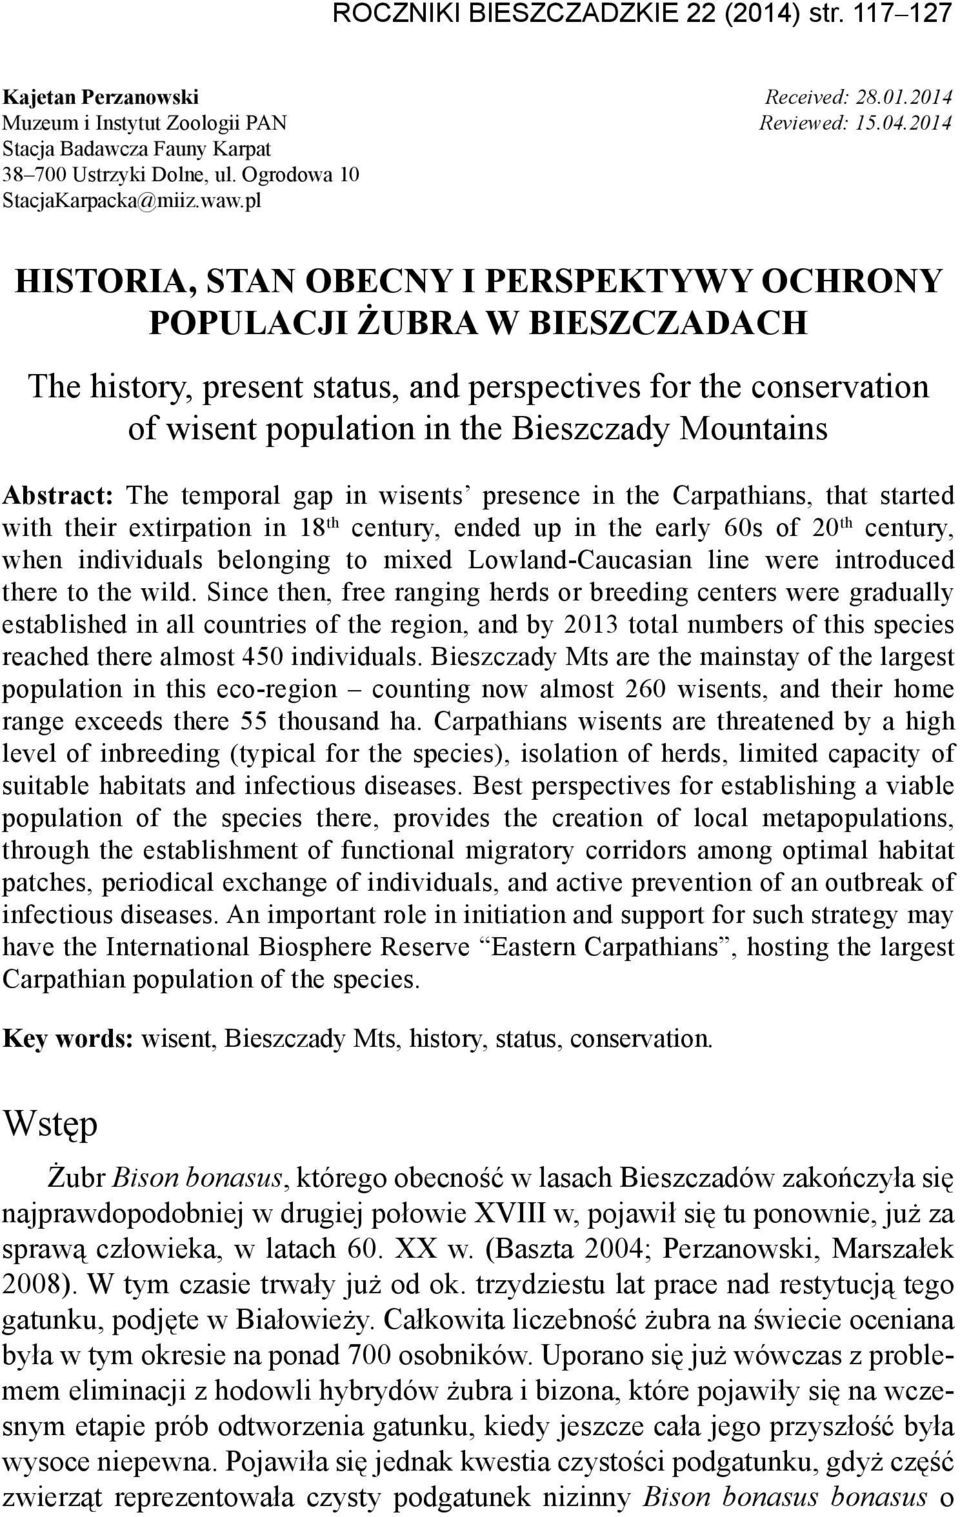 pl HISTORIA, STAN OBECNY I PERSPEKTYWY OCHRONY POPULACJI ŻUBRA W BIESZCZADACH The history, present status, and perspectives for the conservation of wisent population in the Bieszczady Mountains